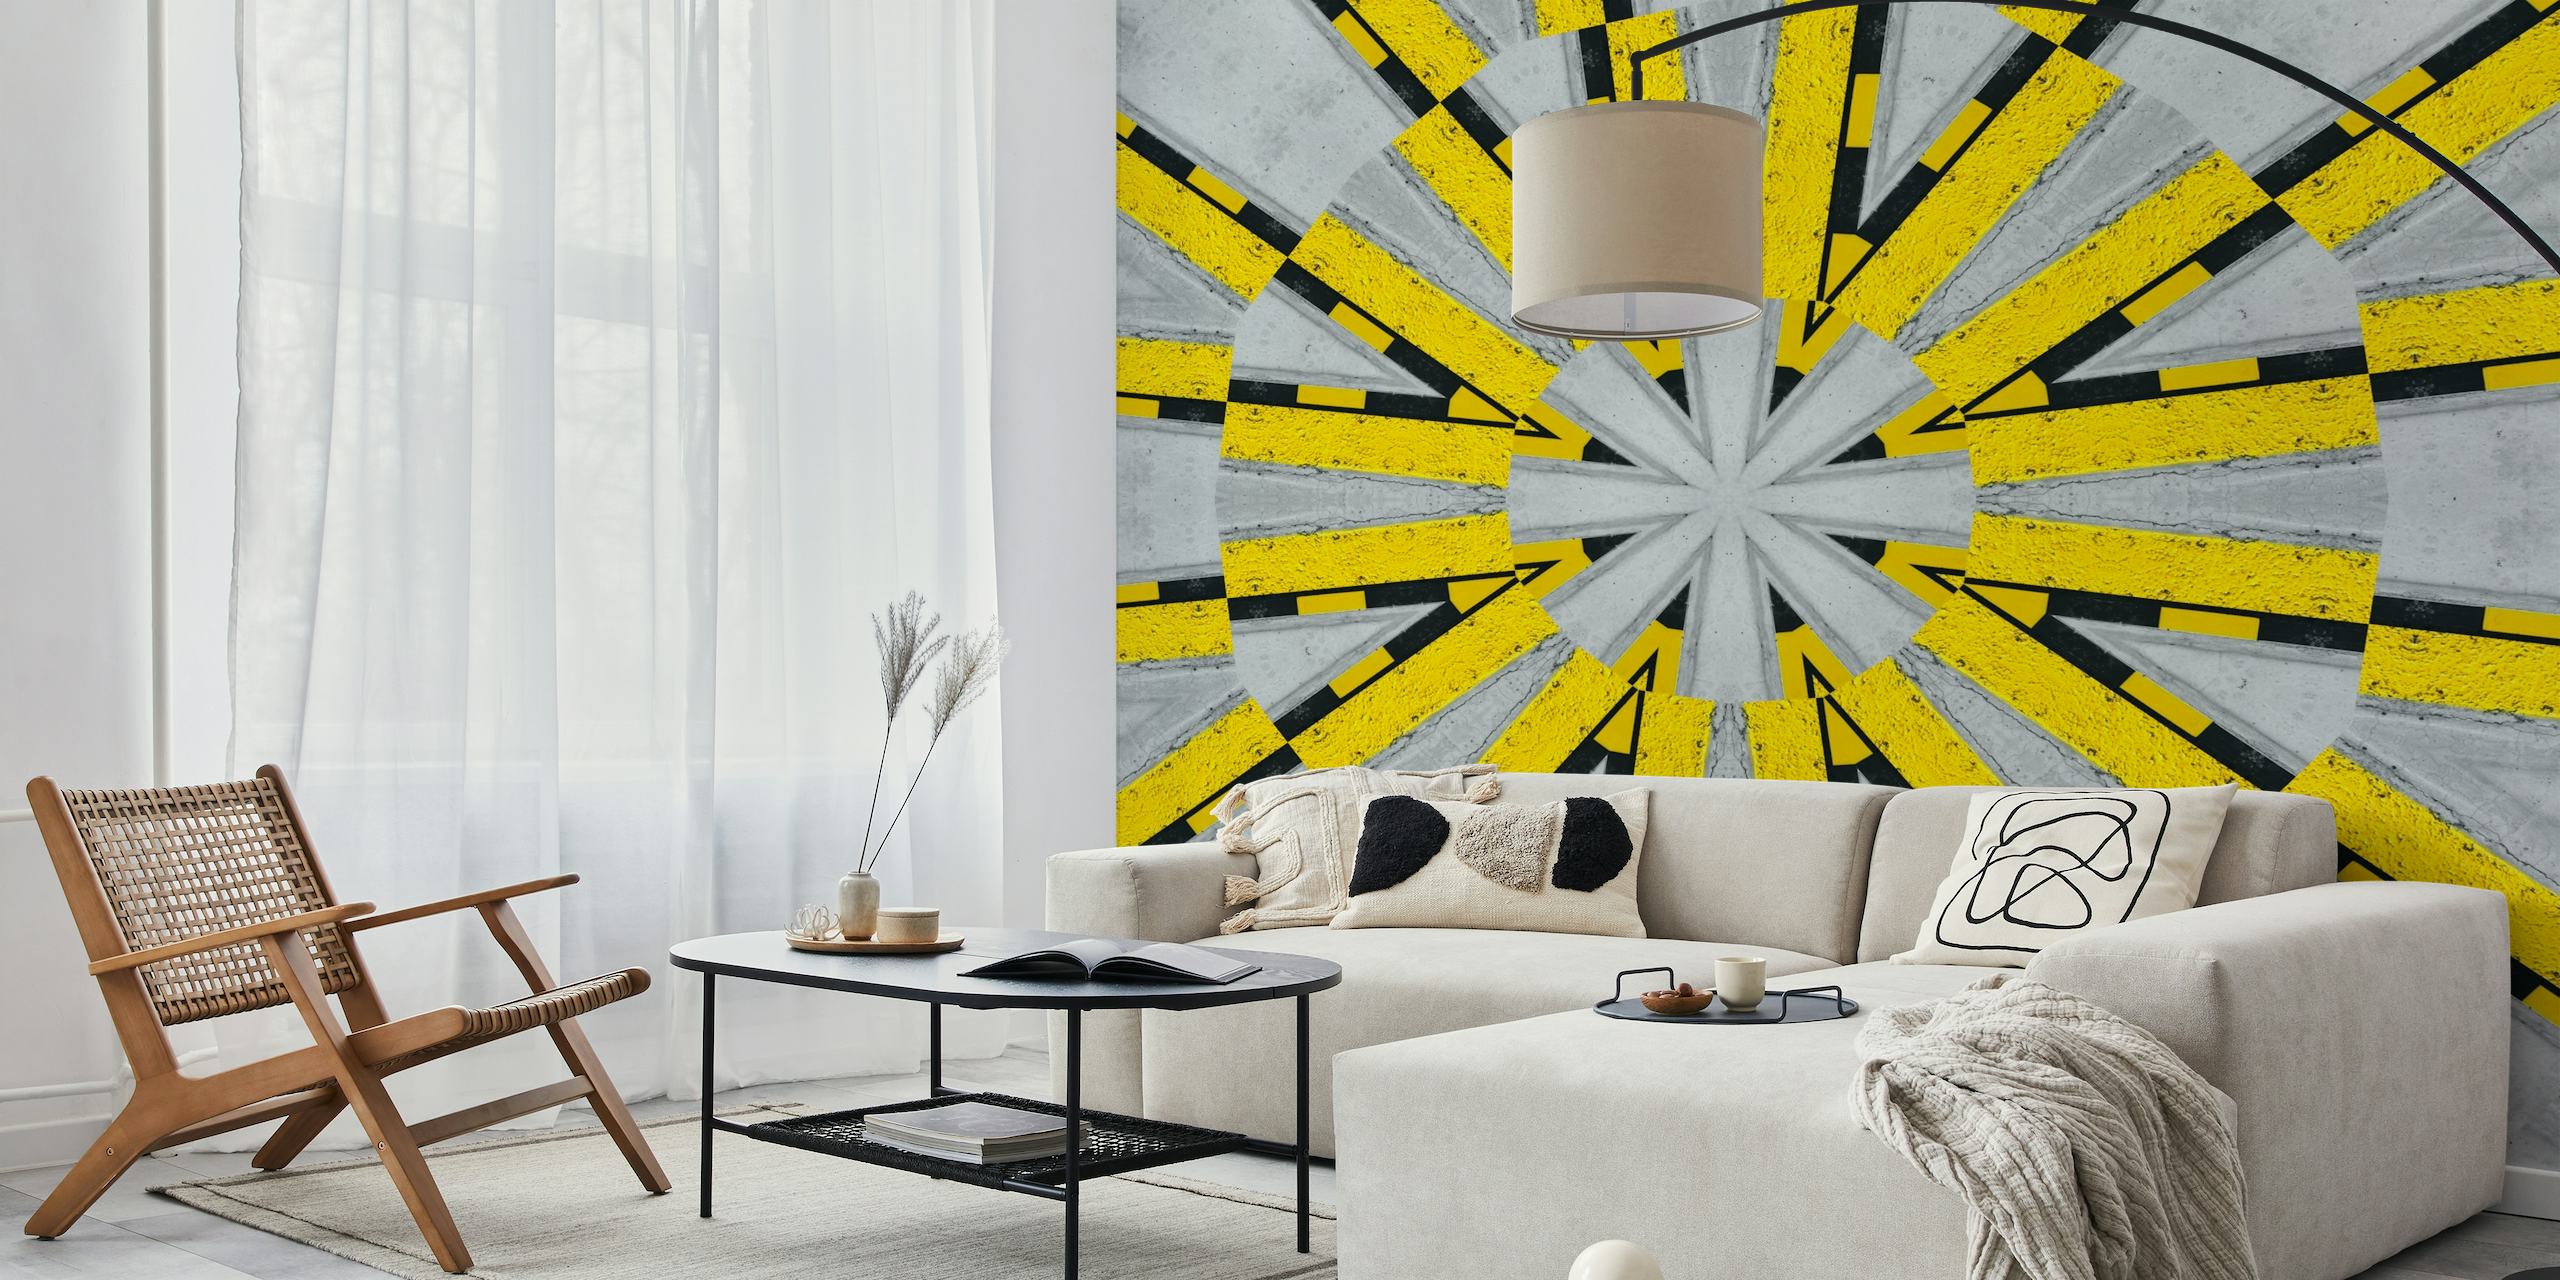 Abstract grey concrete wall mural with yellow tribal patterns and symmetrical design